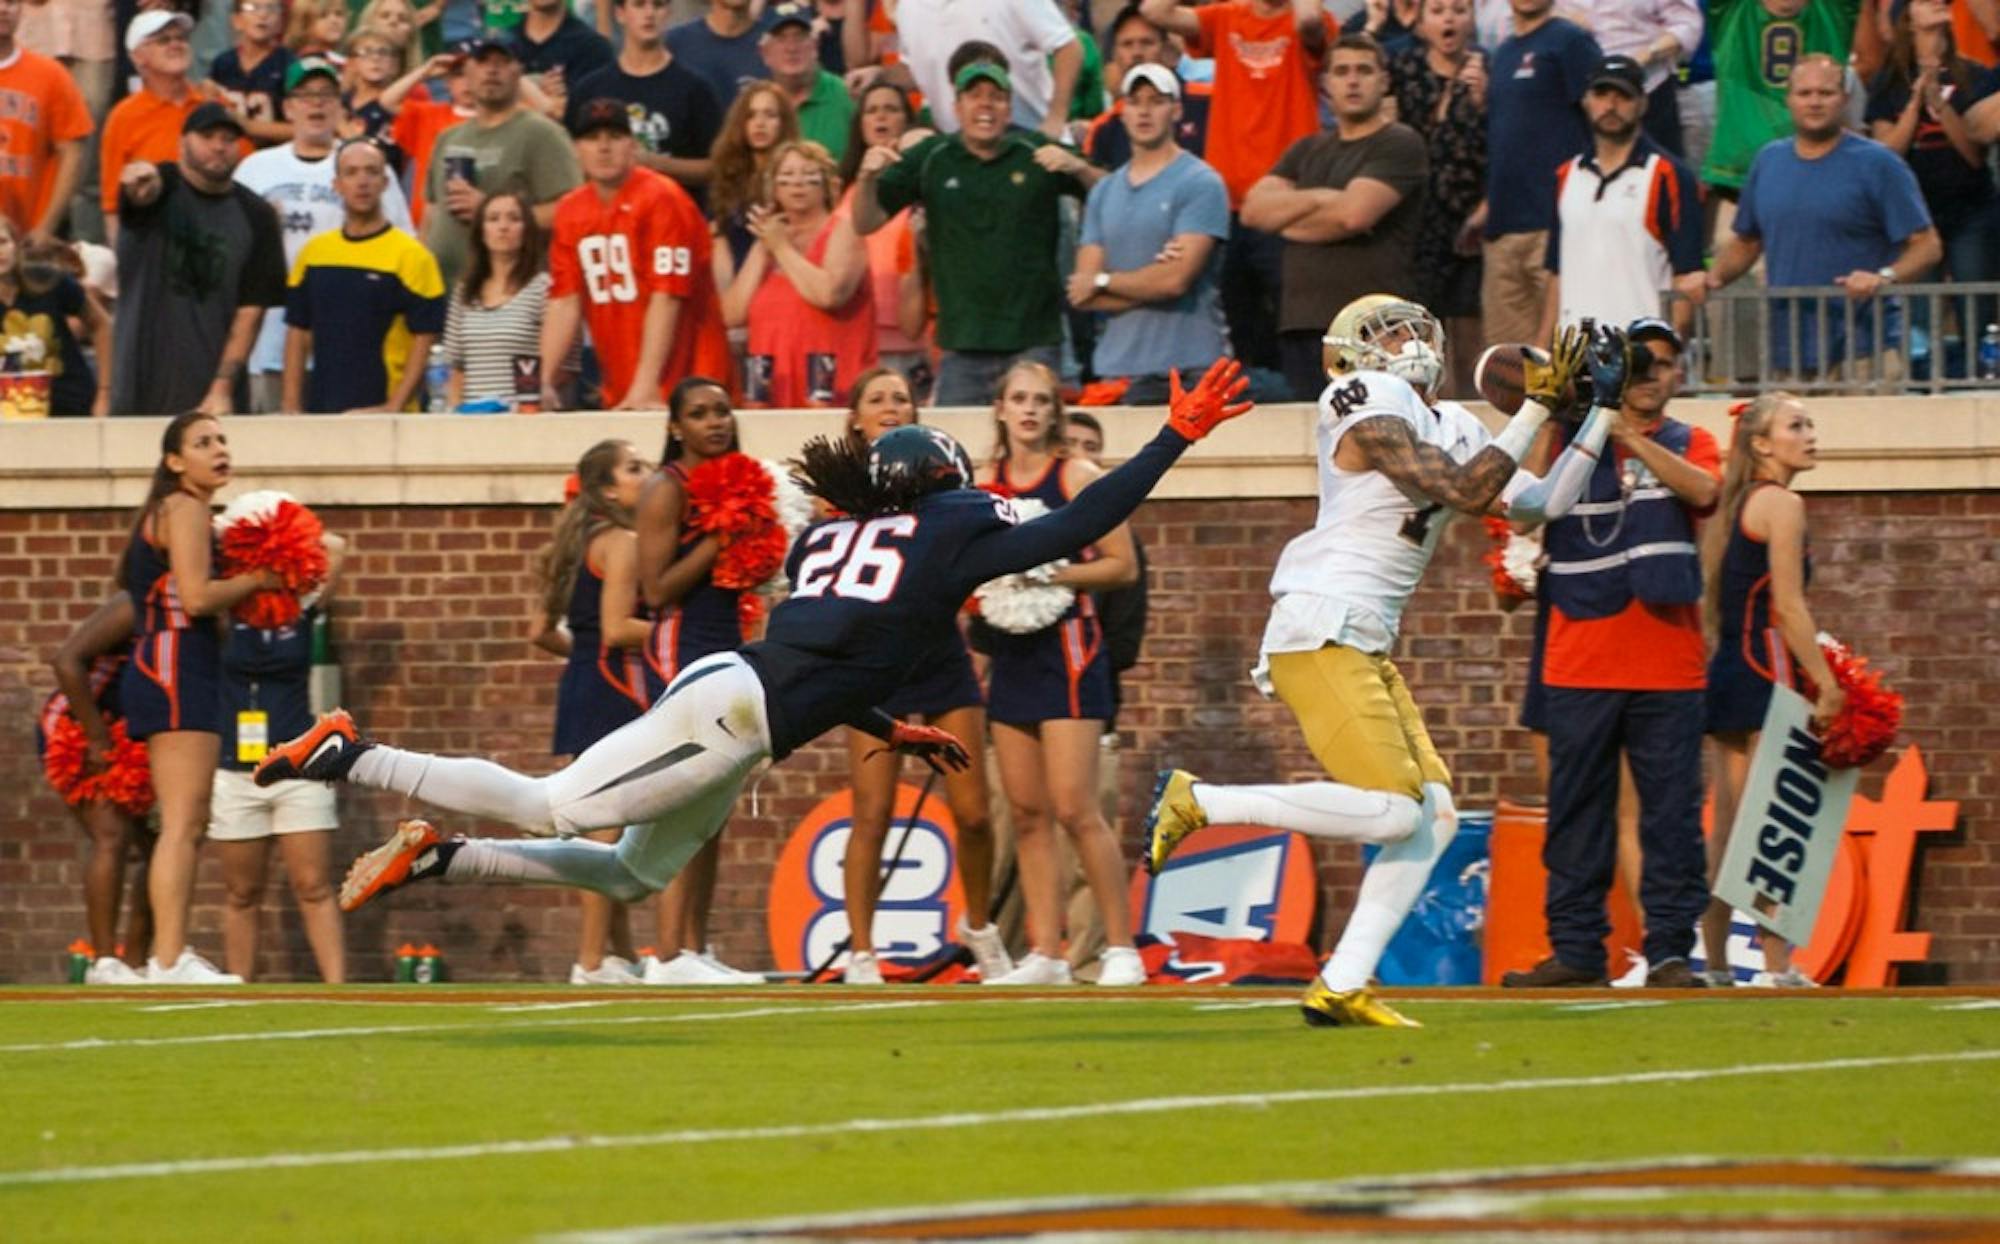 Former Irish receiver Will Fuller hauls in the game-winning touchdown reception over a defender during Notre Dame’s 34-27 win over Virginia on Sept. 12. Fuller was selected 21st overall in the NFL Draft.